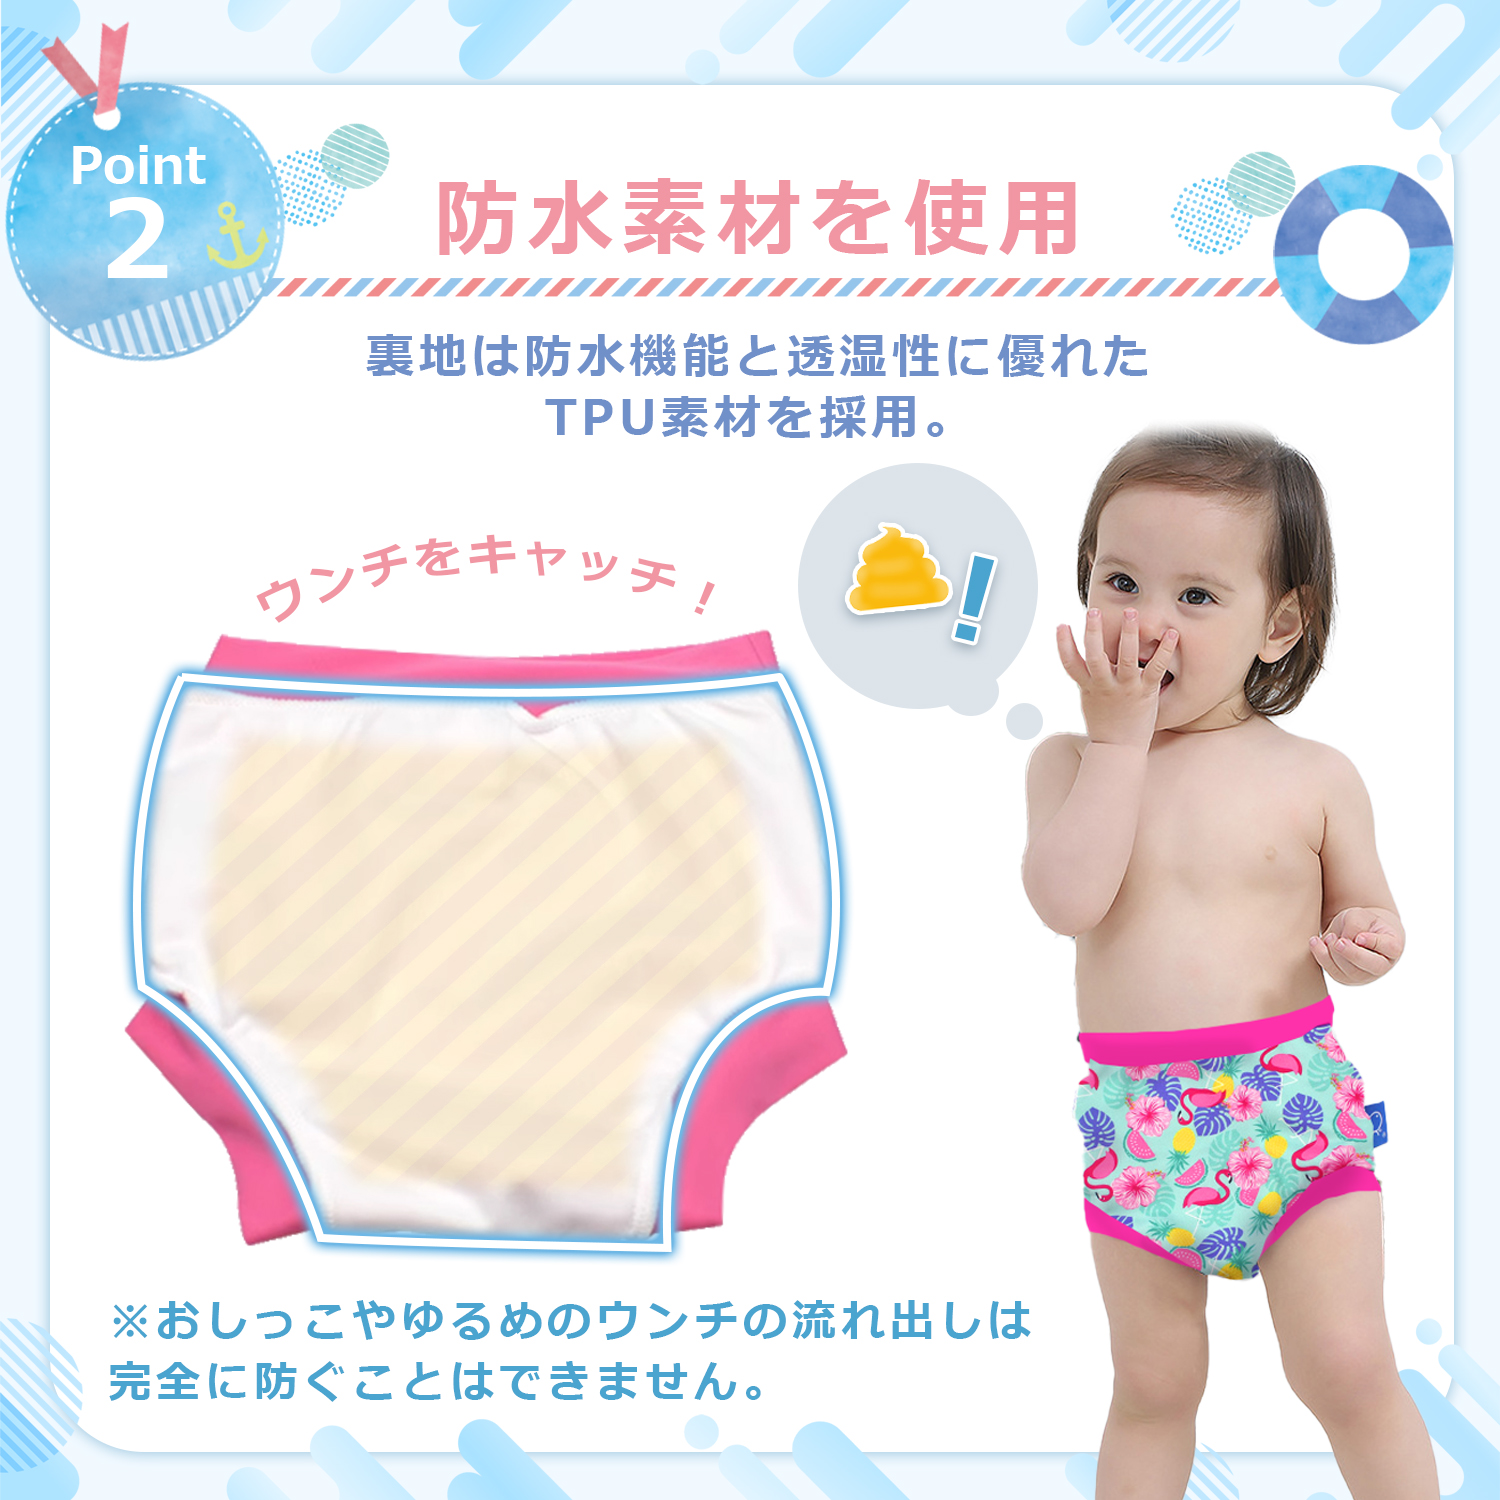  baby swimsuit swimsuit 80 man woman playing in water pants baby swimsuit playing in water for Homme tsu baby 70 80 90 man girl Homme tsu with function swimsuit swim pants swim for Homme tsu